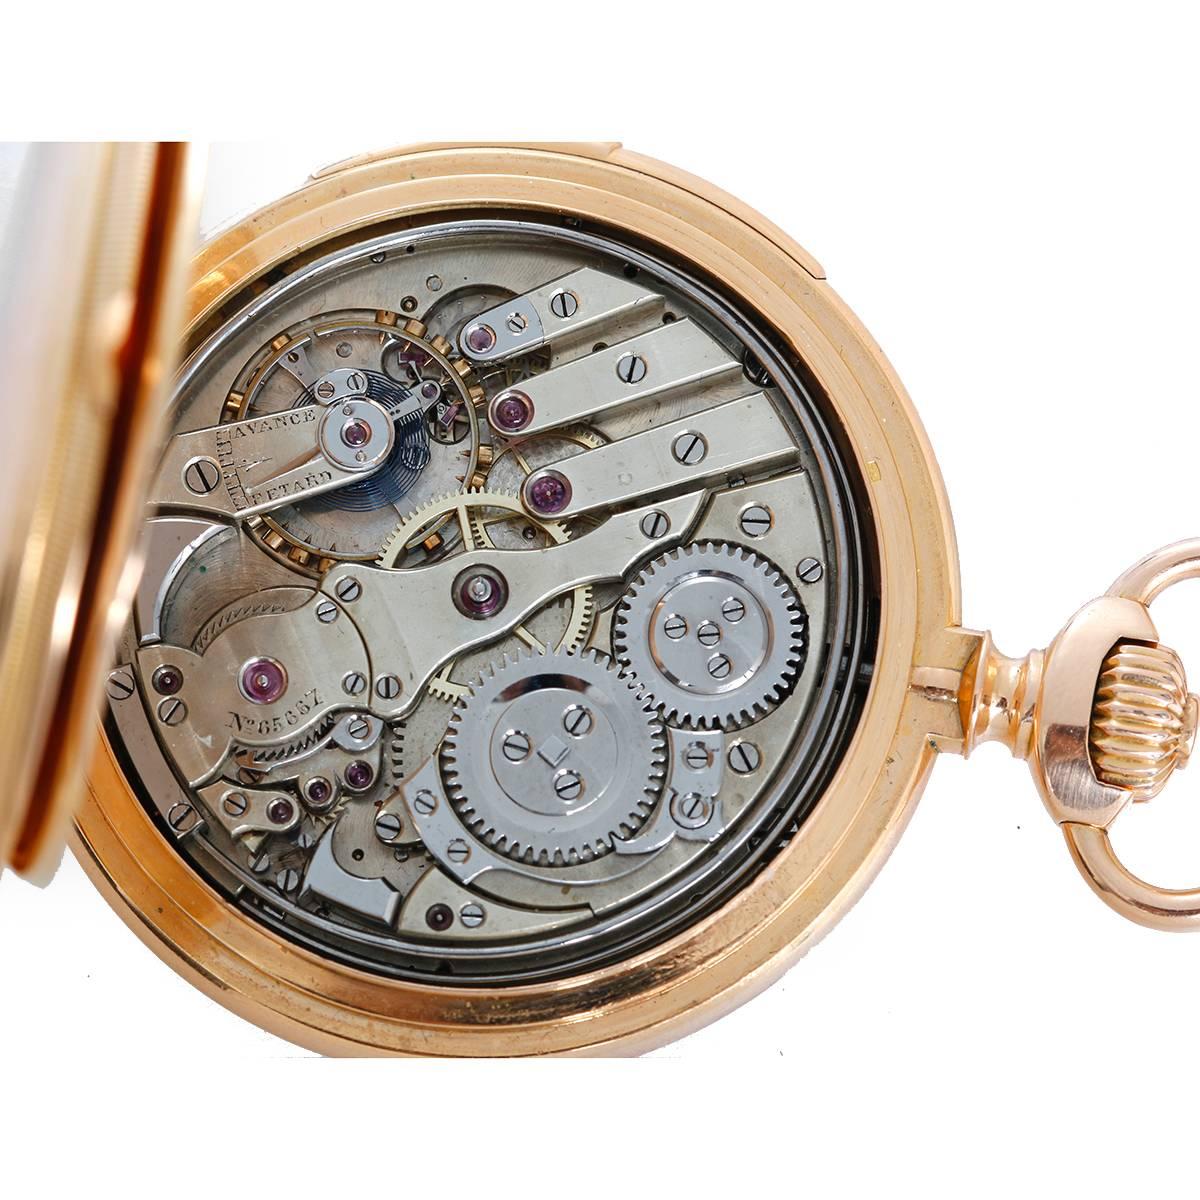 Patek Philippe Hunting Case Minute Repeater Pocket Watch 2